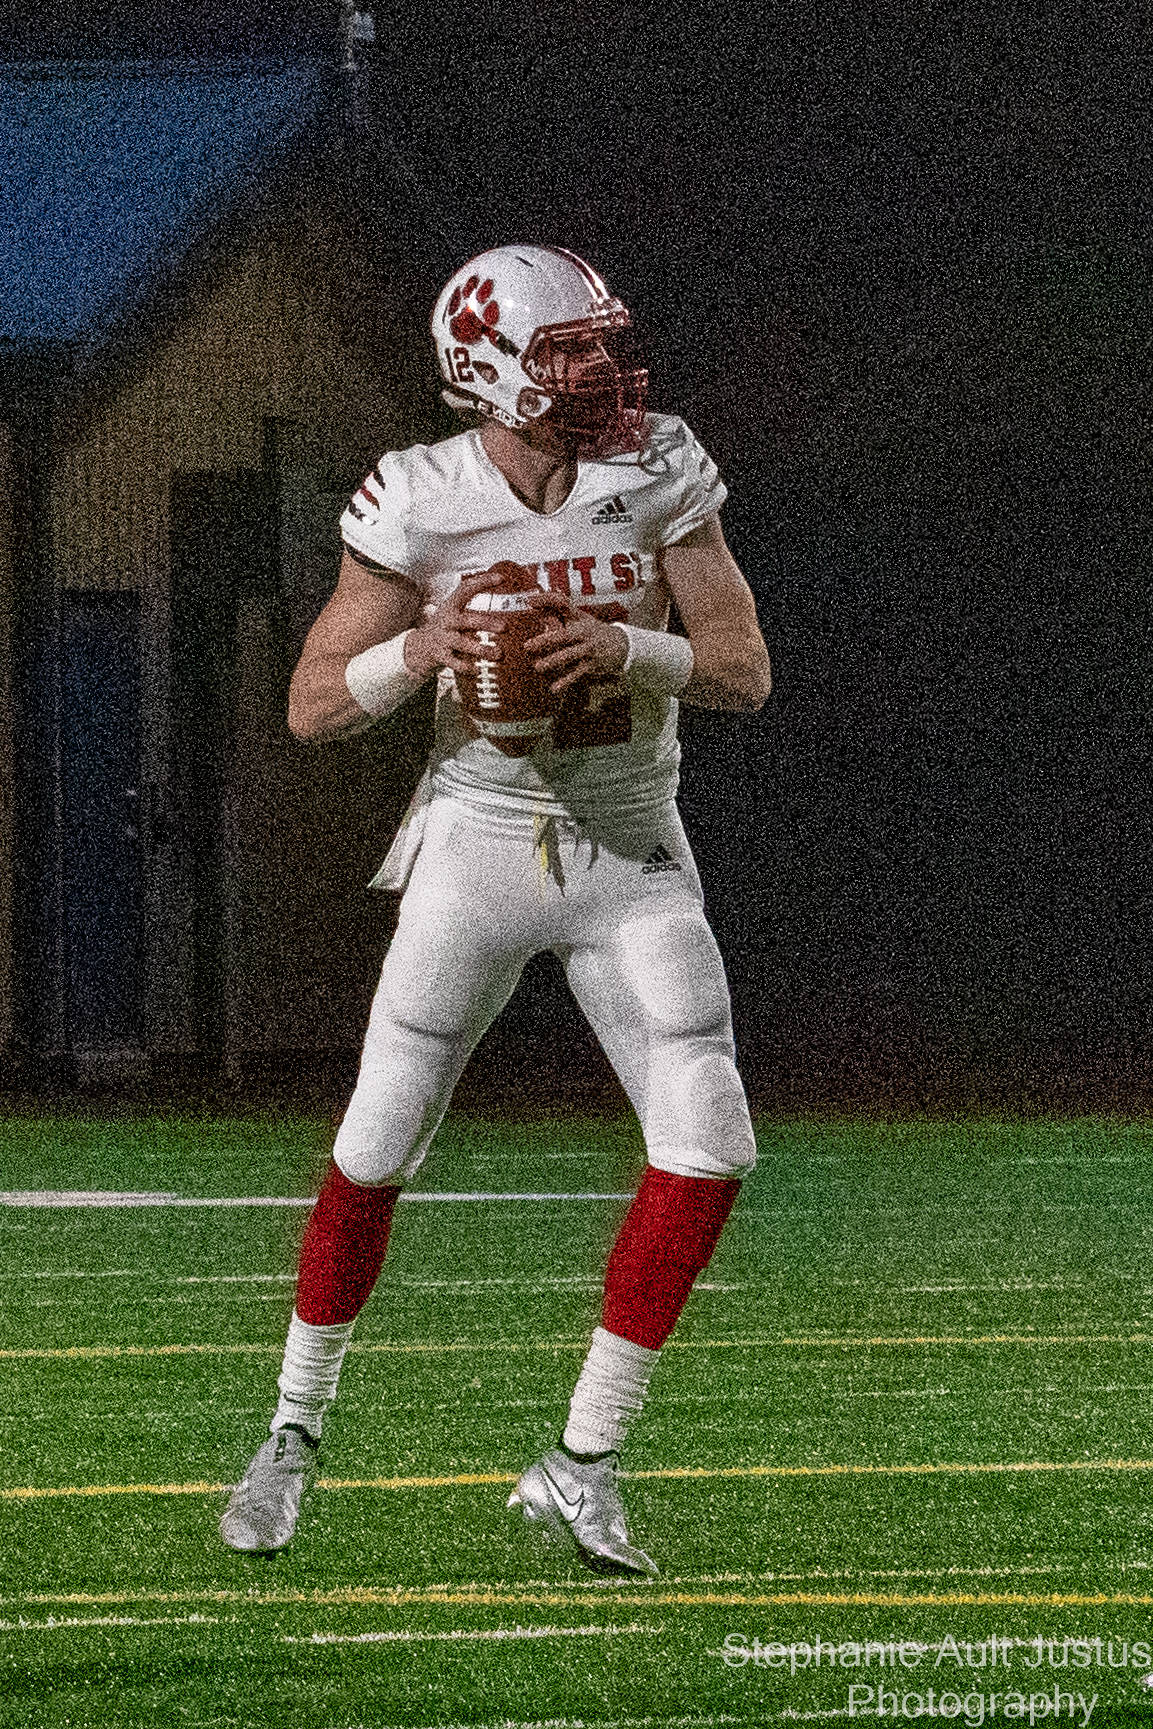 Mt. Si senior quarterback Clay Millen looks for a receiver to connect with during the Wildcats’ 23-13 victory over Bellevue on March 12. On one play in the second half, Millen broke free from three Bellevue tacklers and threw the ball 30 yards for a touchdown. Millen nailed two touchdown passes to Zach Soliday and one to Jacob Shaffer. Photo courtesy of Stephanie Ault Justus